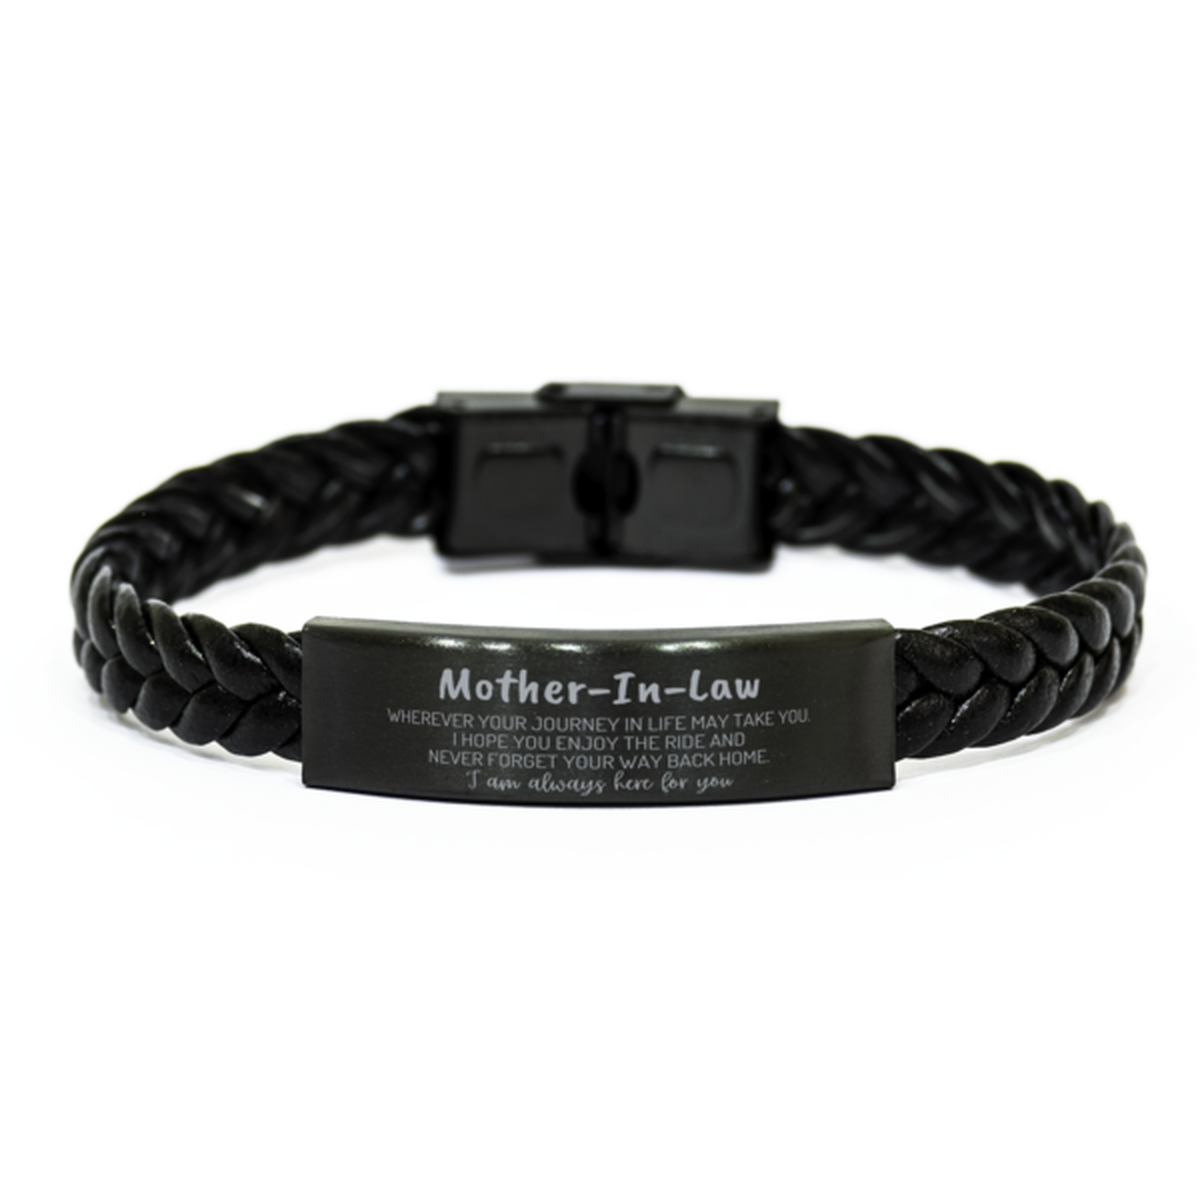 Mother-In-Law wherever your journey in life may take you, I am always here for you Mother-In-Law Braided Leather Bracelet, Awesome Christmas Gifts For Mother-In-Law, Mother-In-Law Birthday Gifts for Men Women Family Loved One